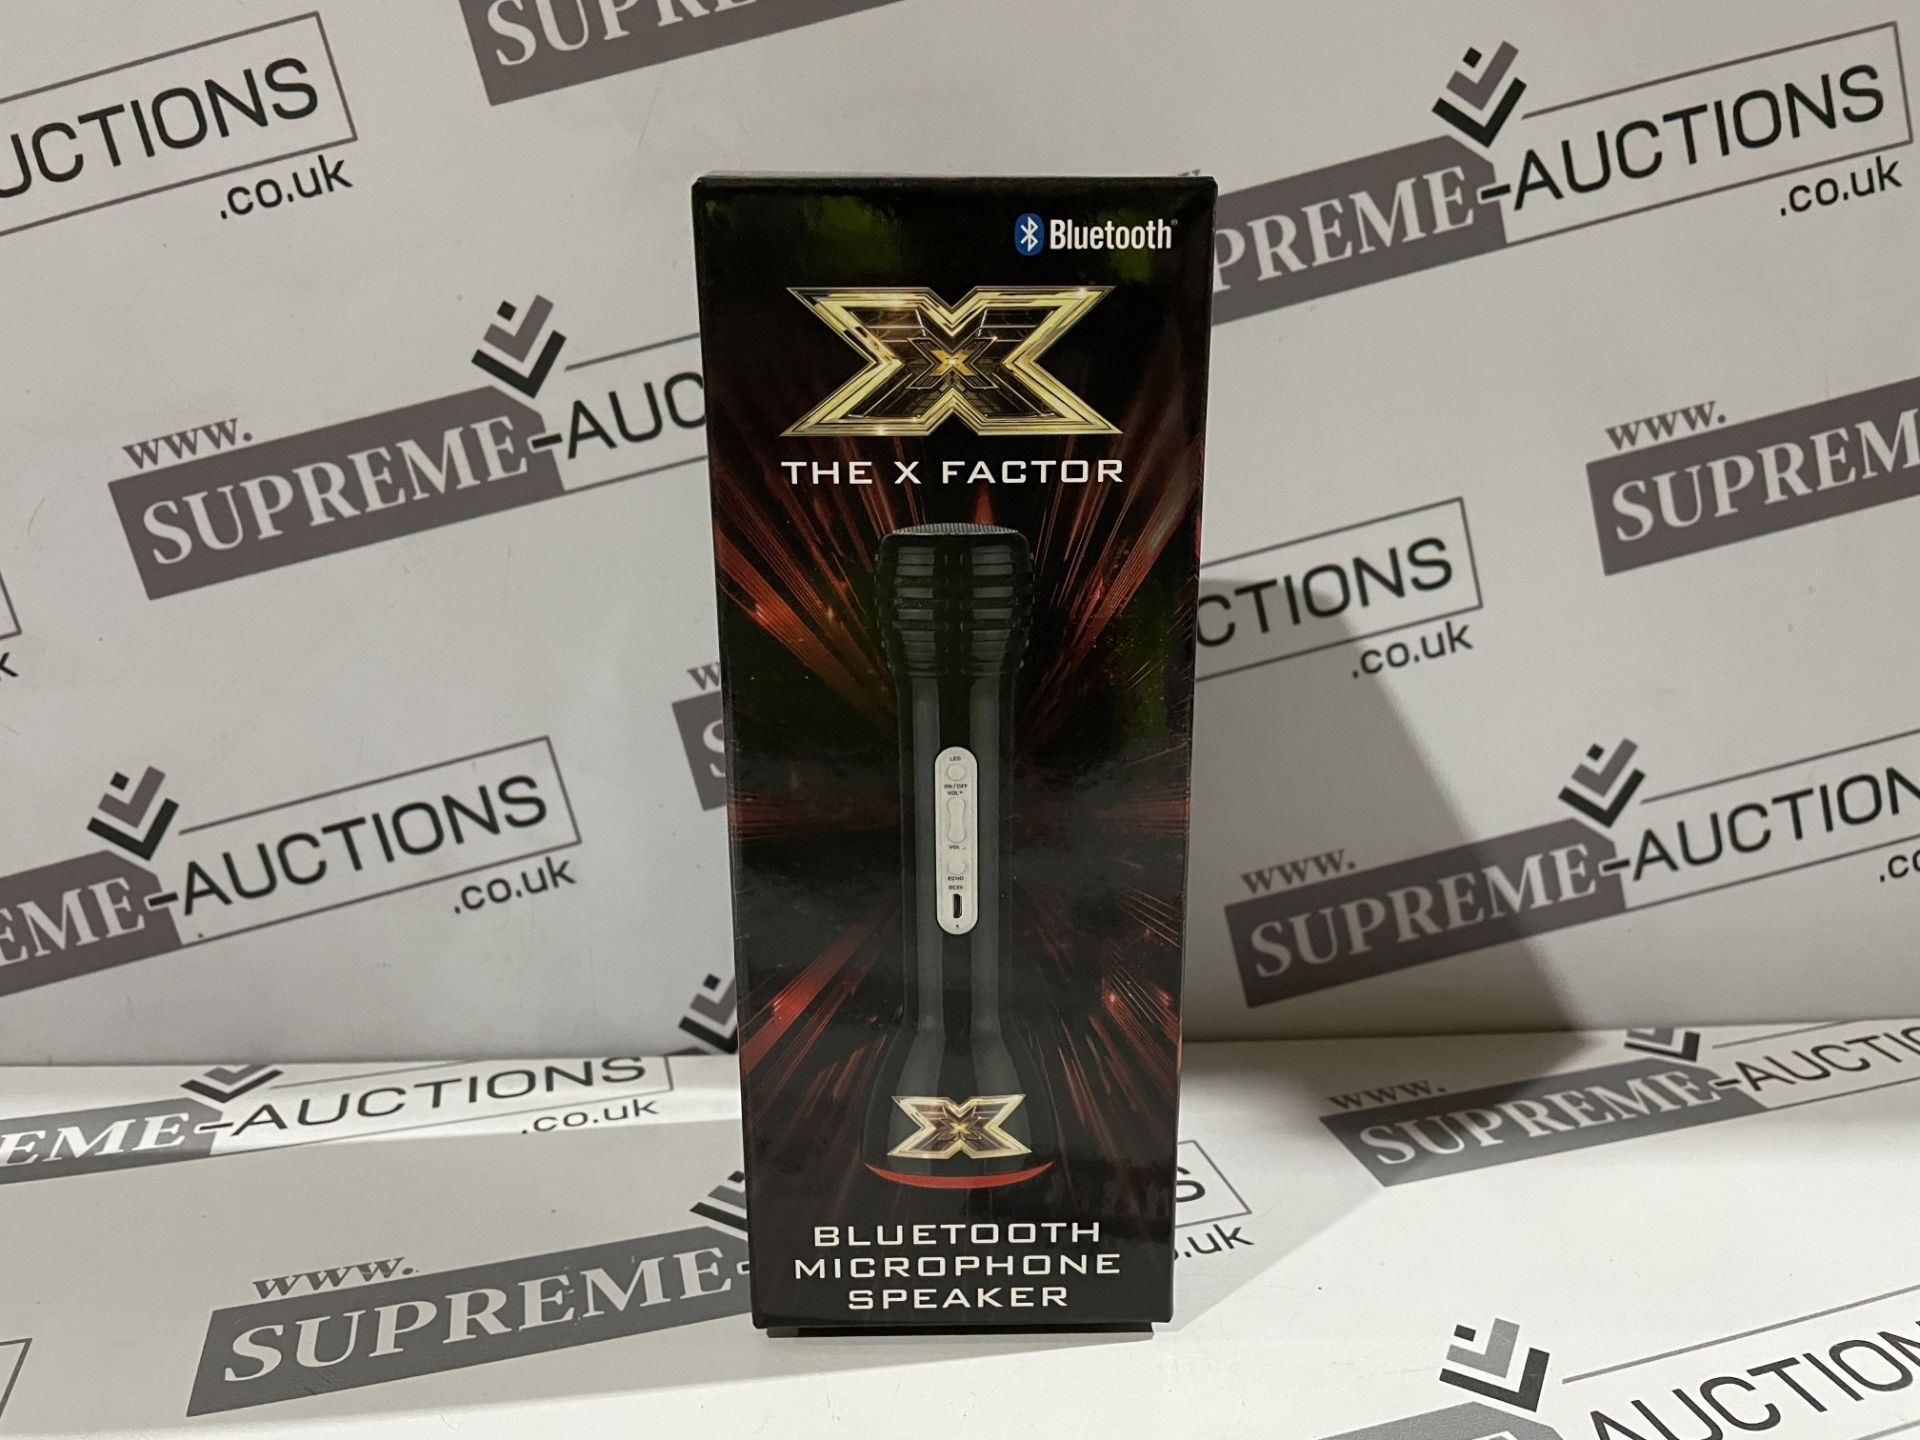 20 X BRAND NEW THE X FACTOR BLUETOOTH MICROPHONE SPEAKERS PCK1